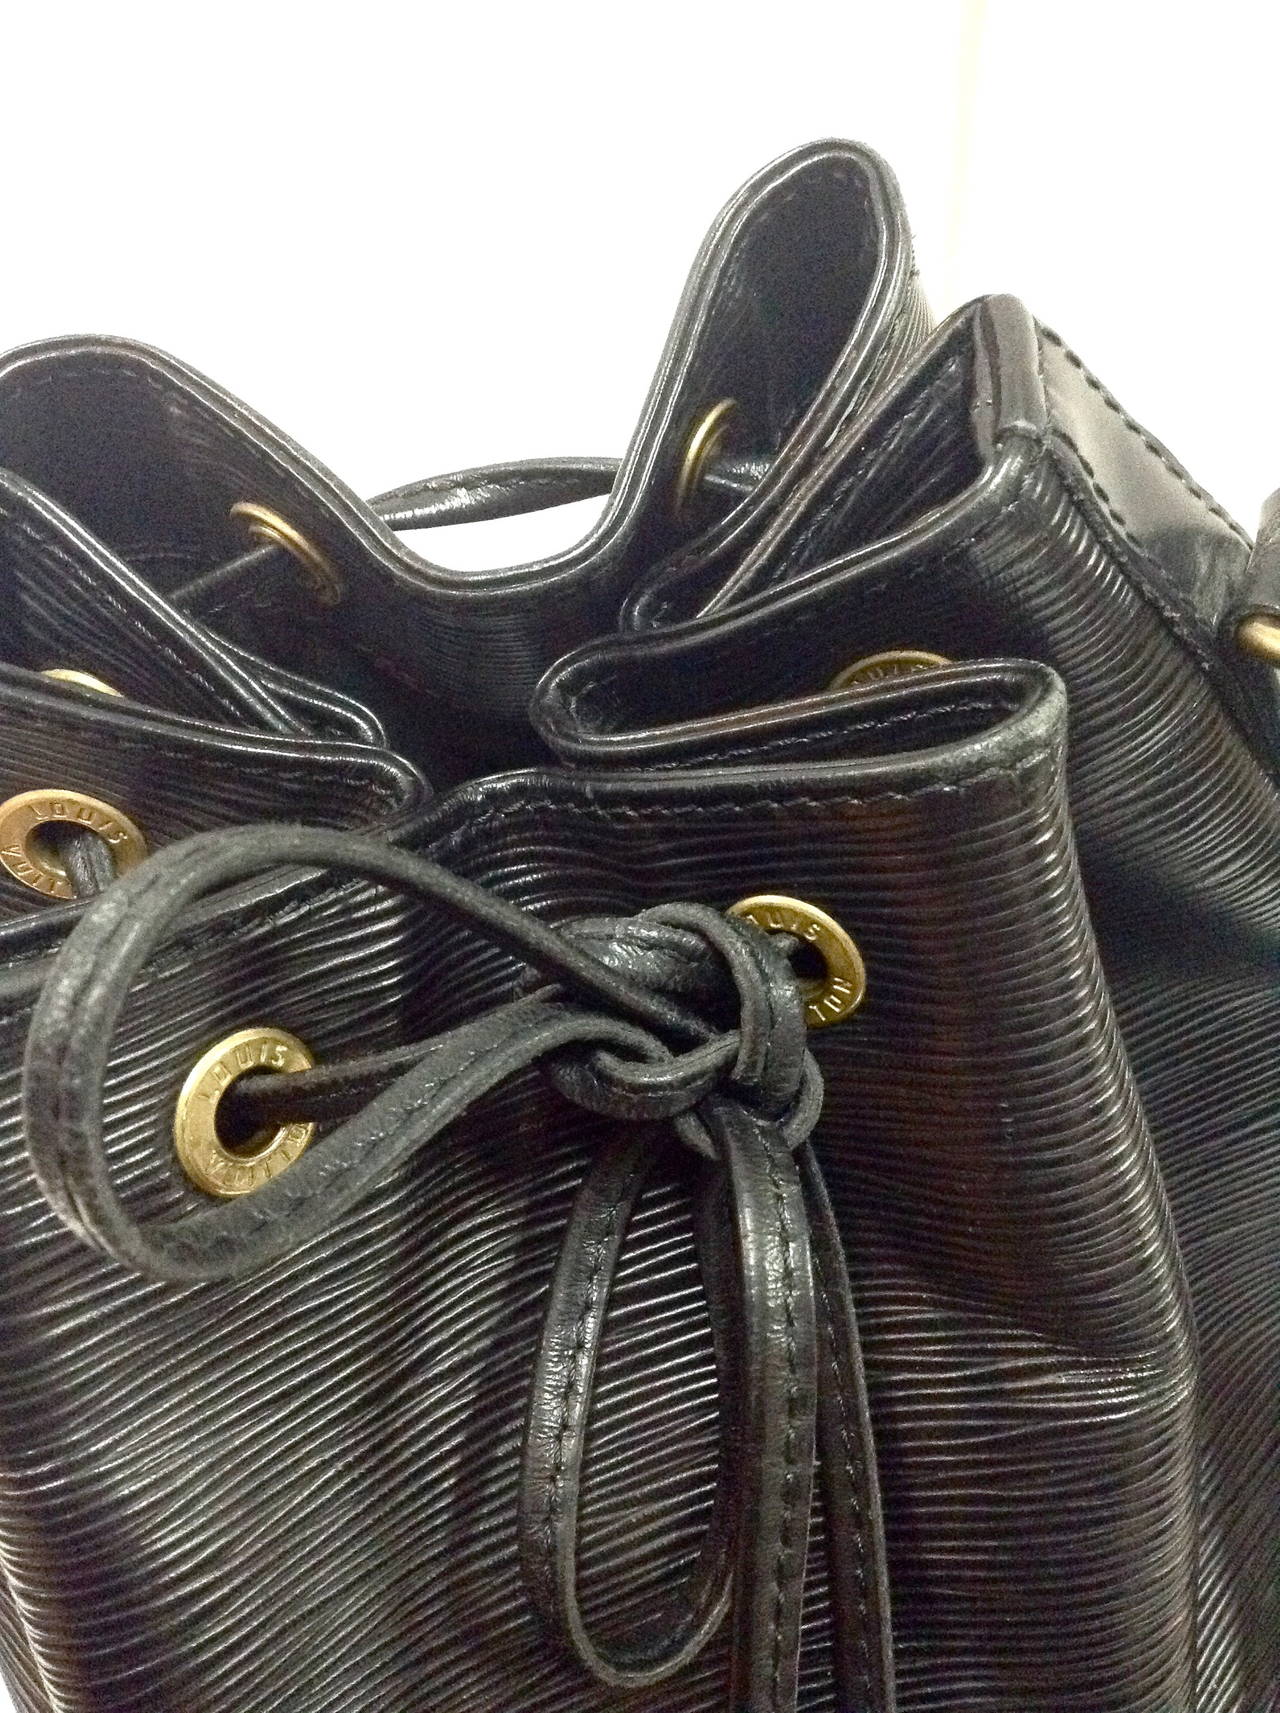 1990 Louis Vuitton Black Epi Leather Noe Bag Gm Retail $2200 In Good Condition For Sale In Westmount, Quebec